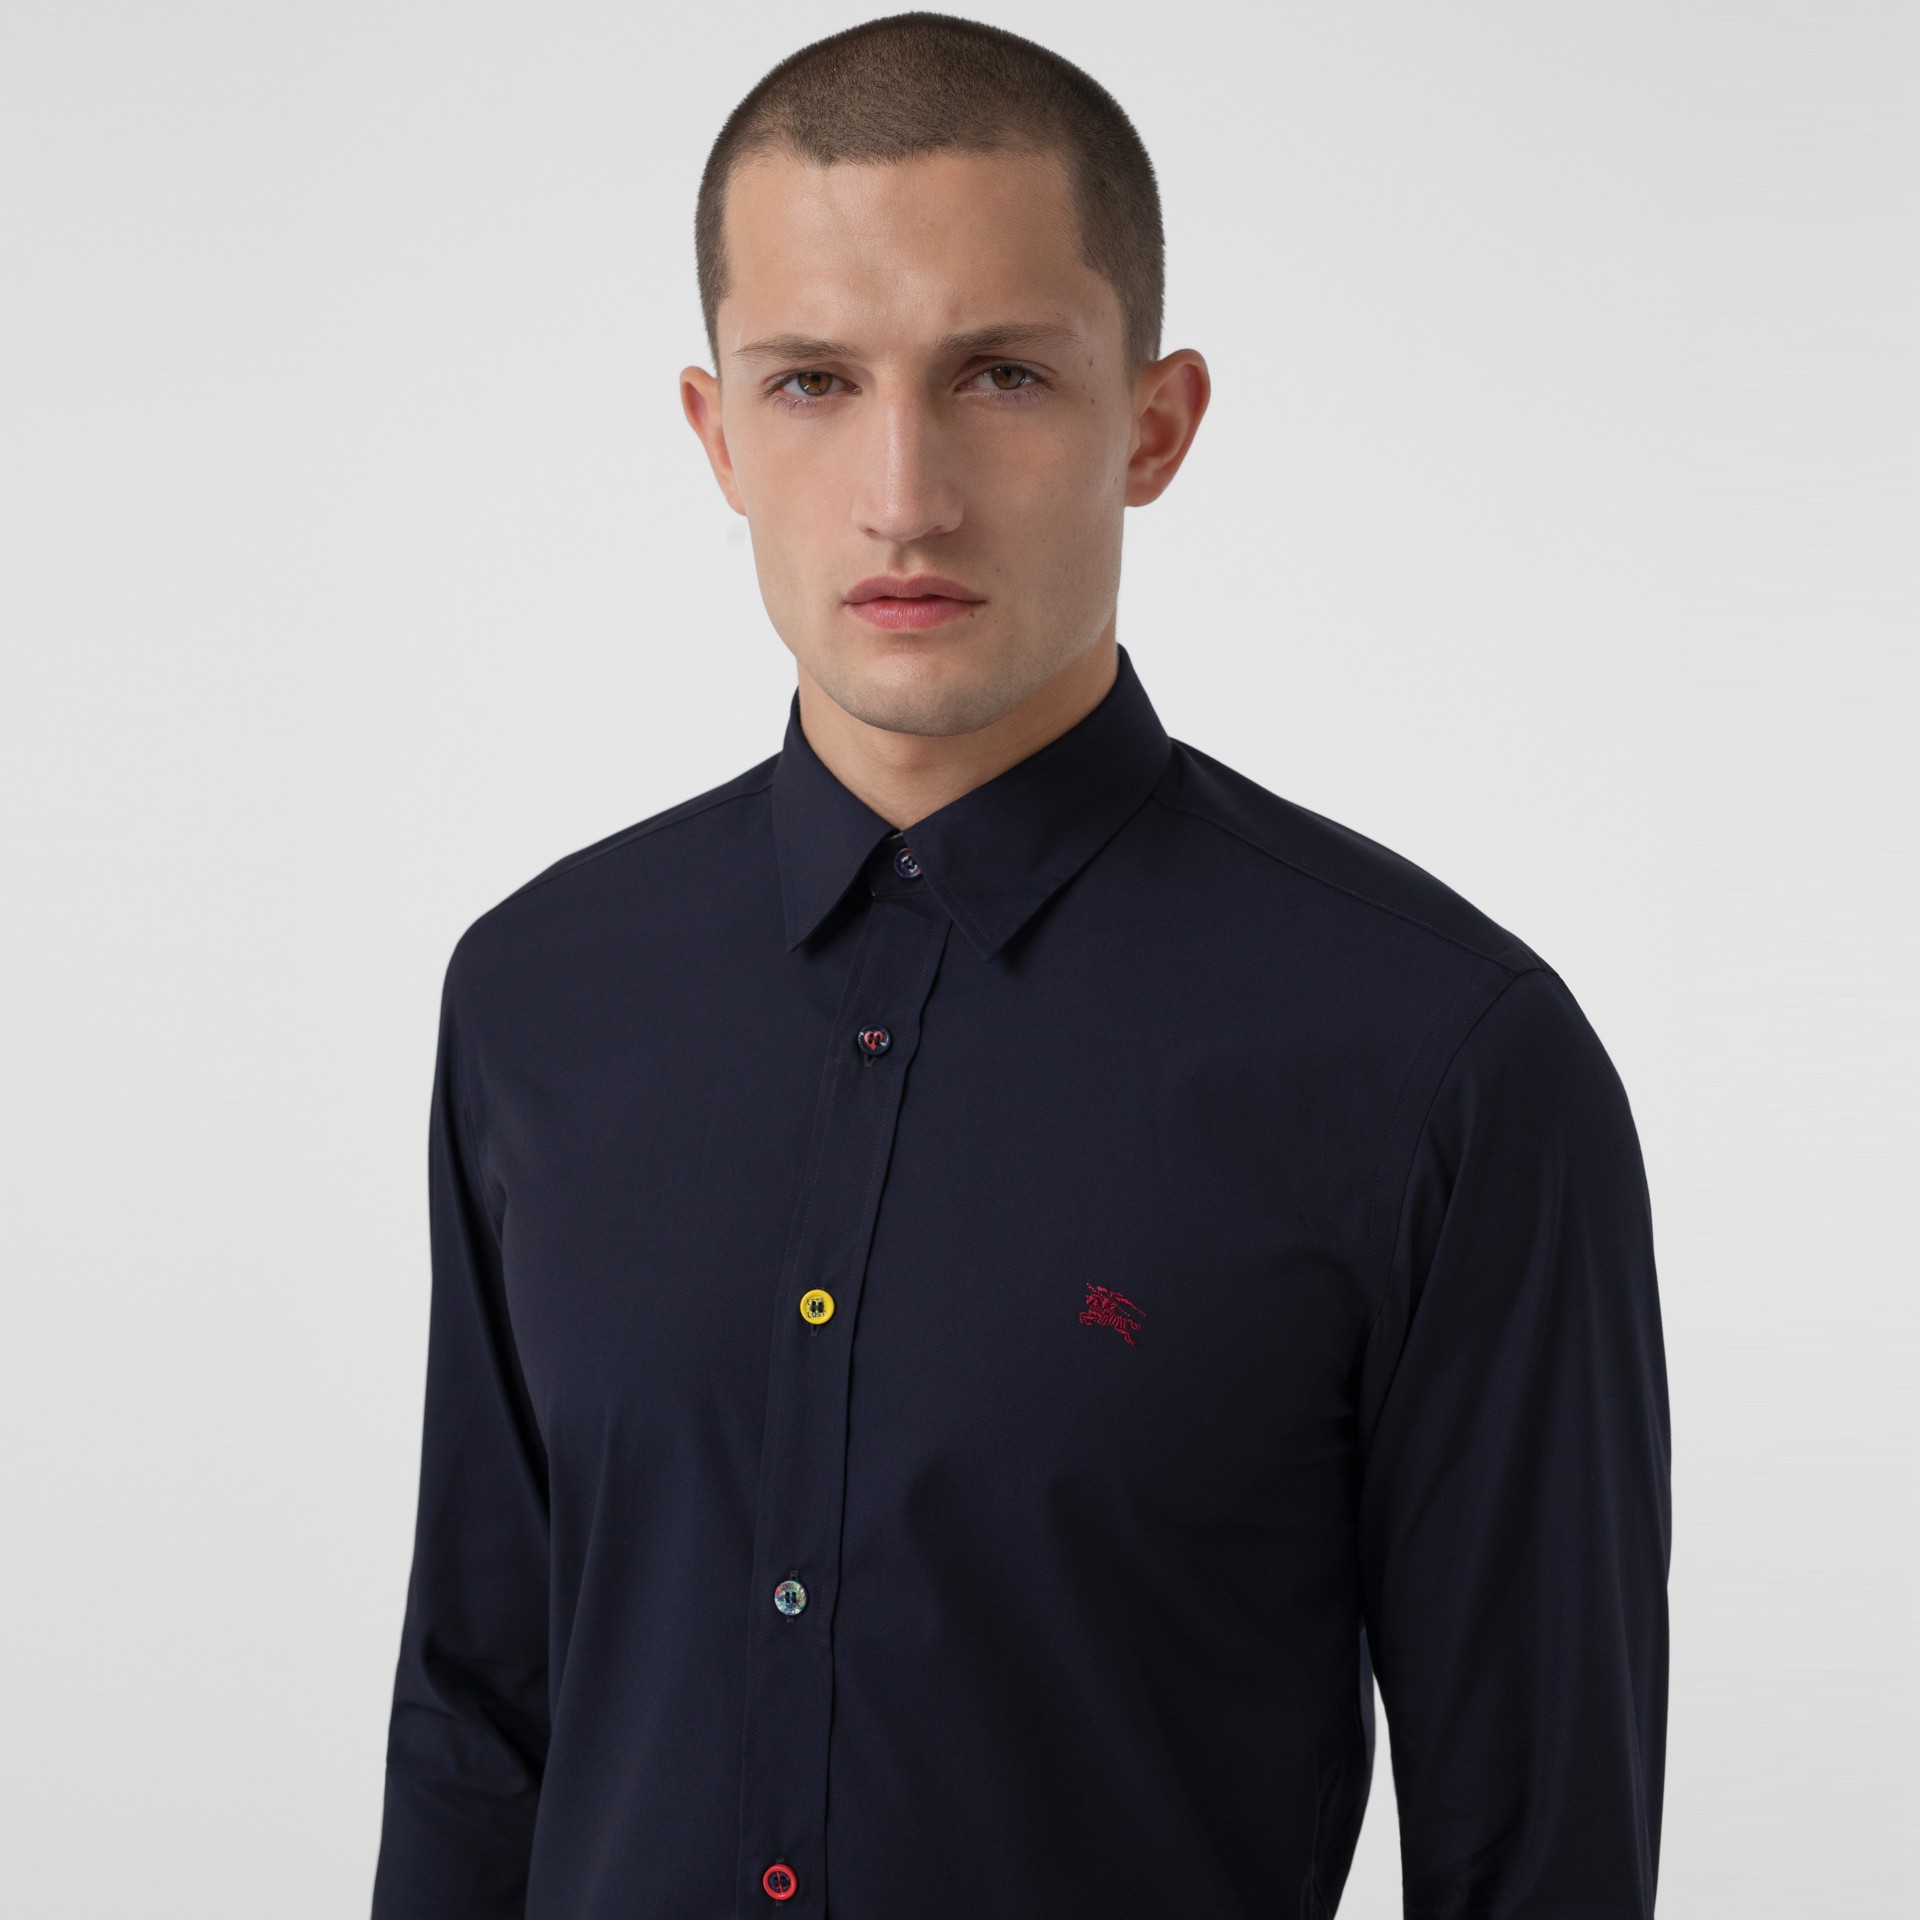 Contrast Button Stretch Cotton Shirt in Navy - Men | Burberry United States